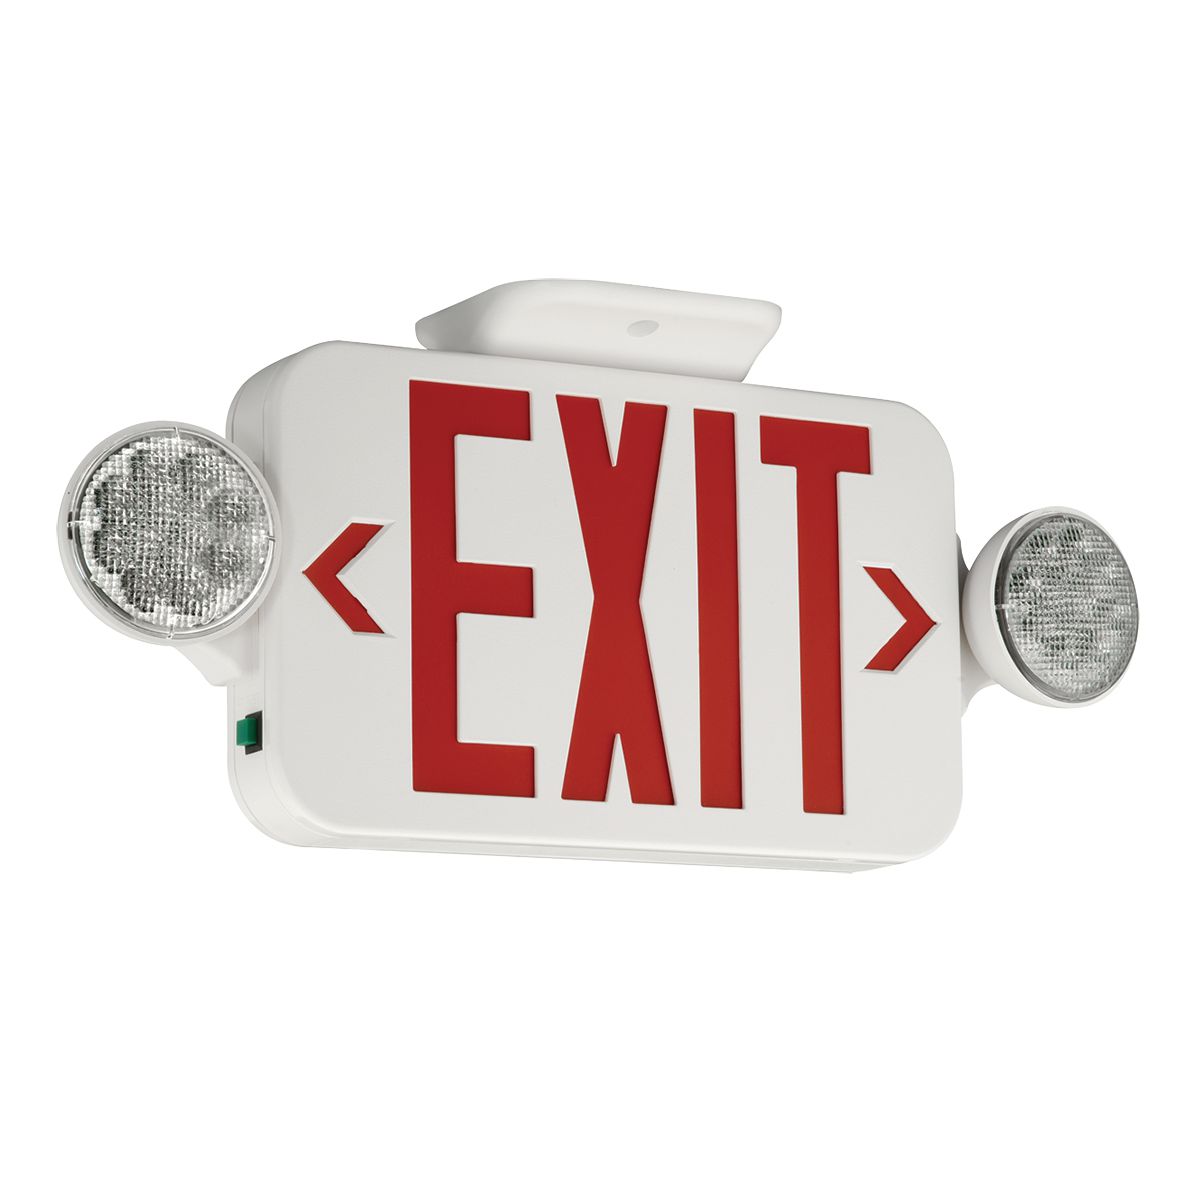 The Compass combination exit sign/emergency light offers quality and value with a compact and attractive LED based emergency exit sign with red letters and 2 fully adjustable LED lamp-heads. The white housing and lamp-heads are made of high impact, UL flame rated thermoplastic. Snap together canopy, housing and removable chevrons for quick and easy installation. The CCR can be applied in stair-wells, hallways, offices and other commercial applications.